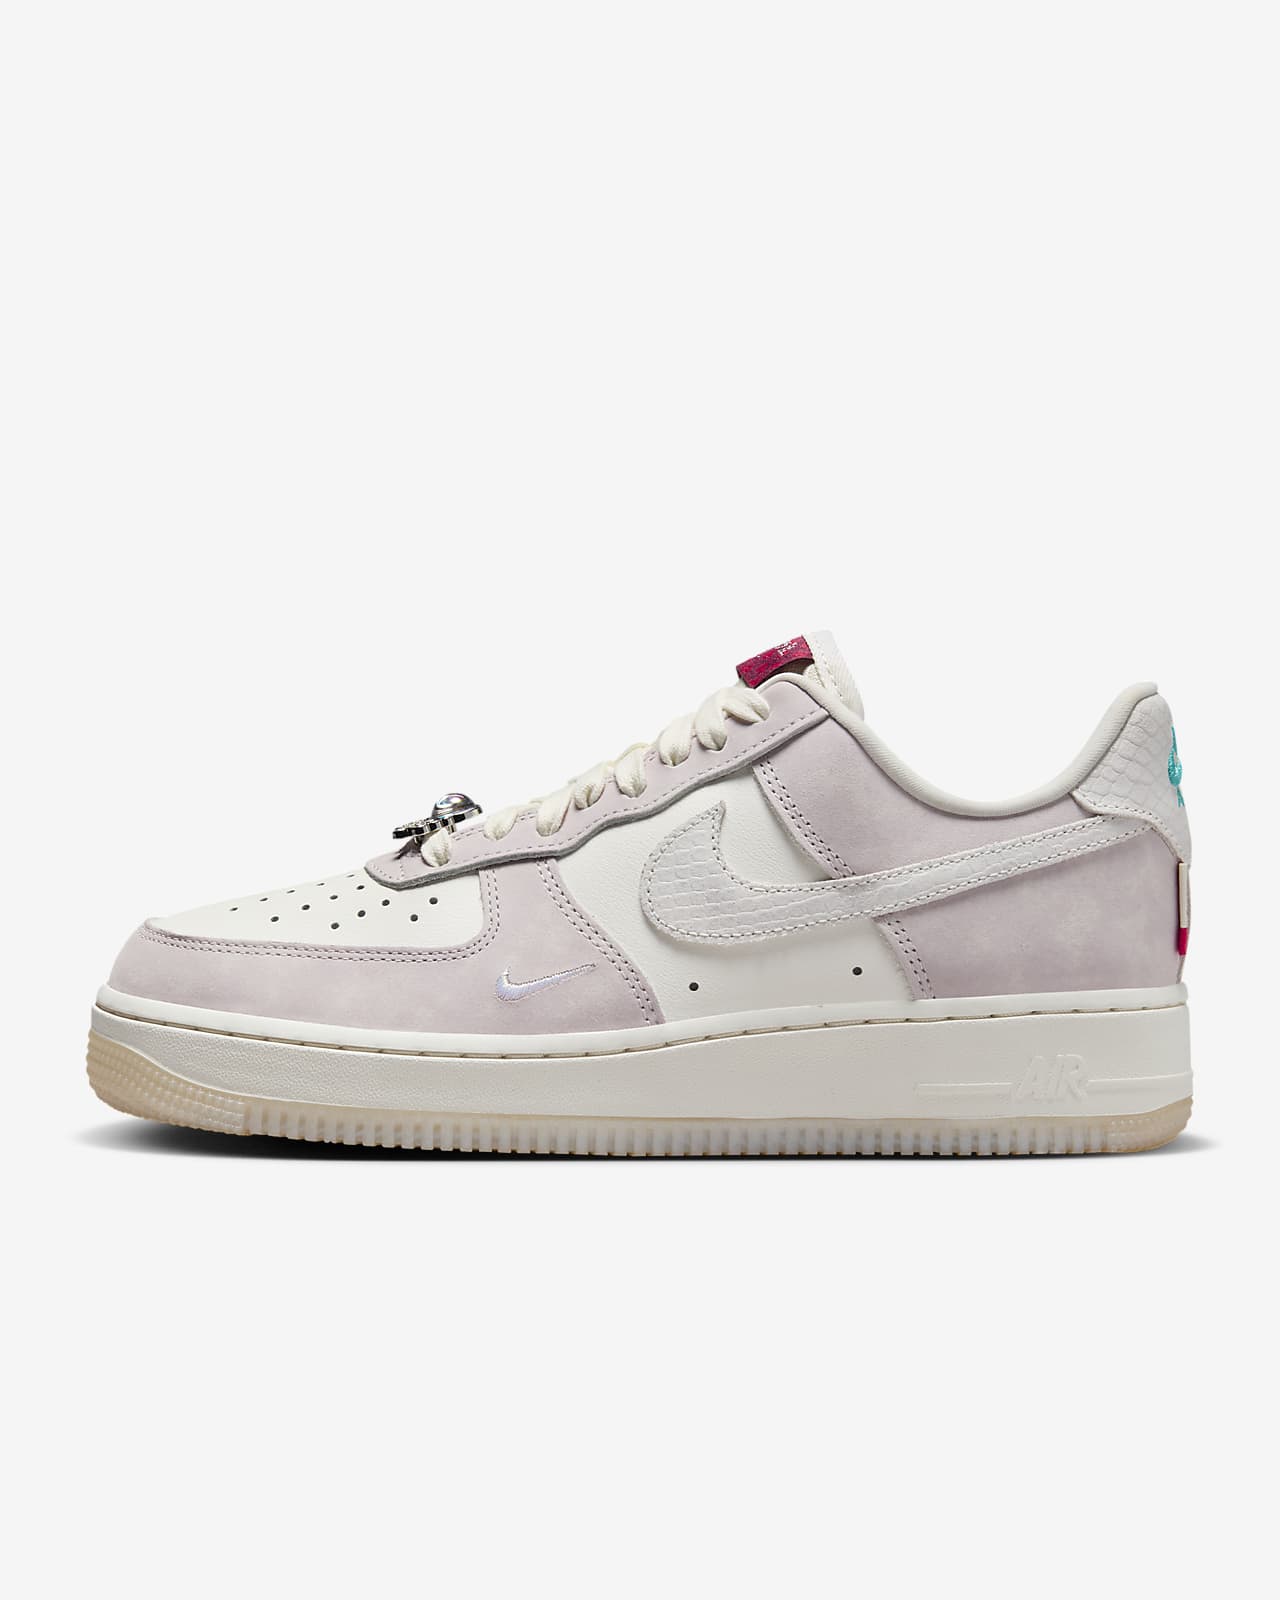 Nike Air Force 1 ’07 LX Women's Shoes